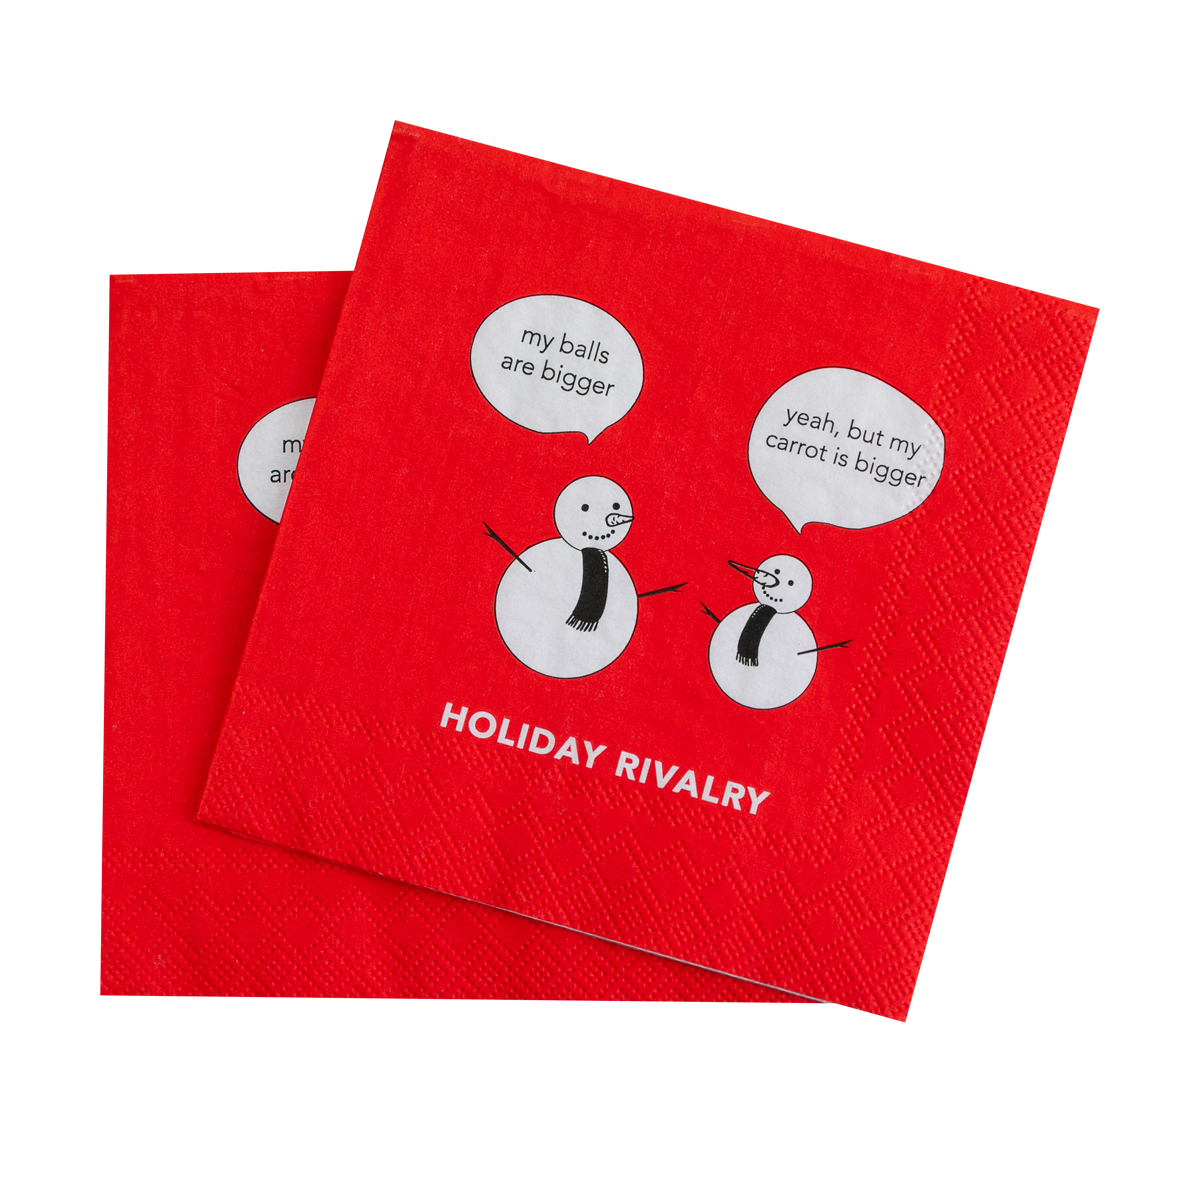 Holiday Rivalry - Cocktail Napkins